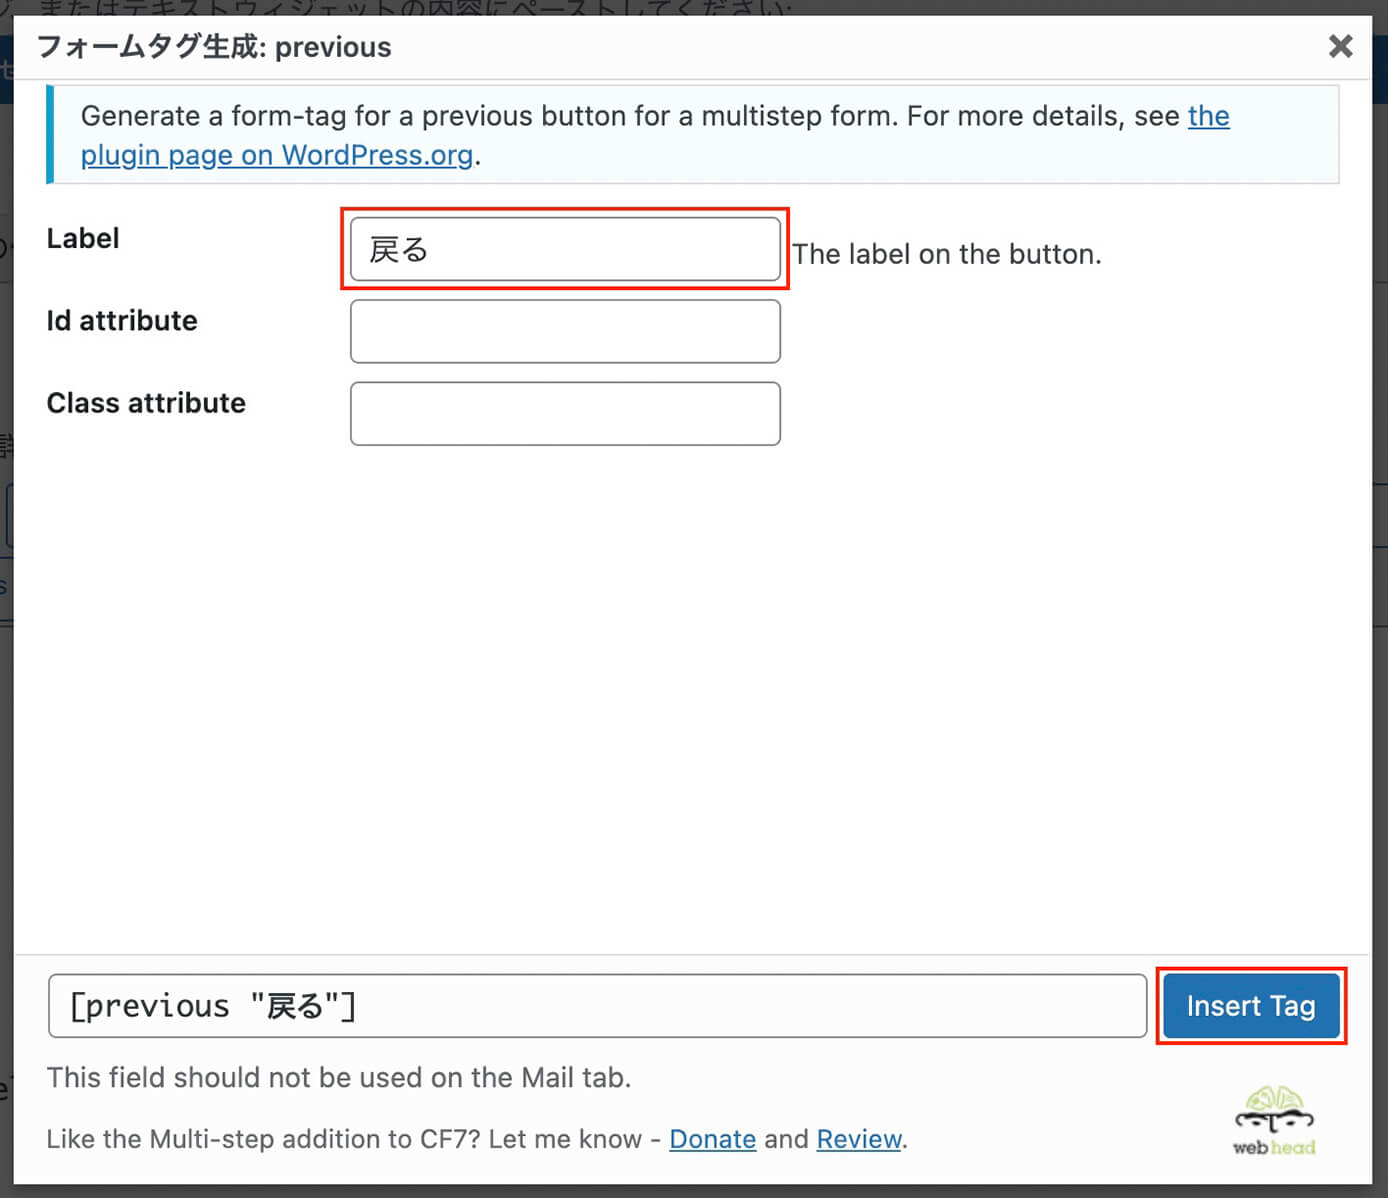 Contact Form 7：『Contact Form 7 Multi-Step Forms』の『previous』フォームタグ生成